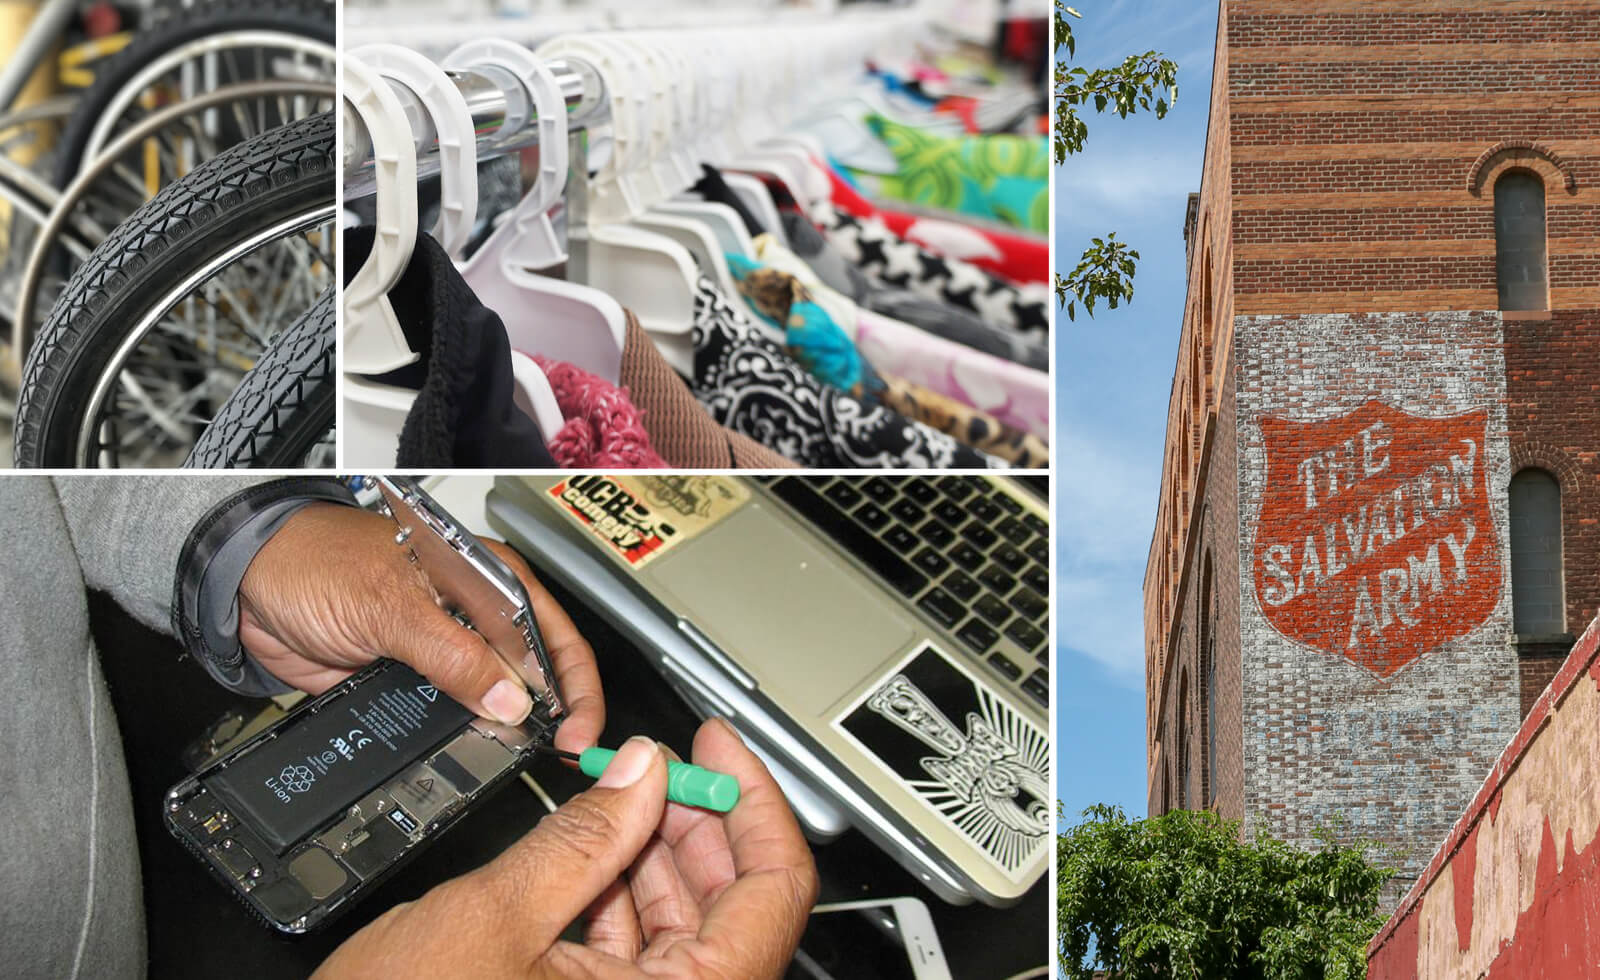 Where To Donate Clothes Furniture And More In Brooklyn In 2019